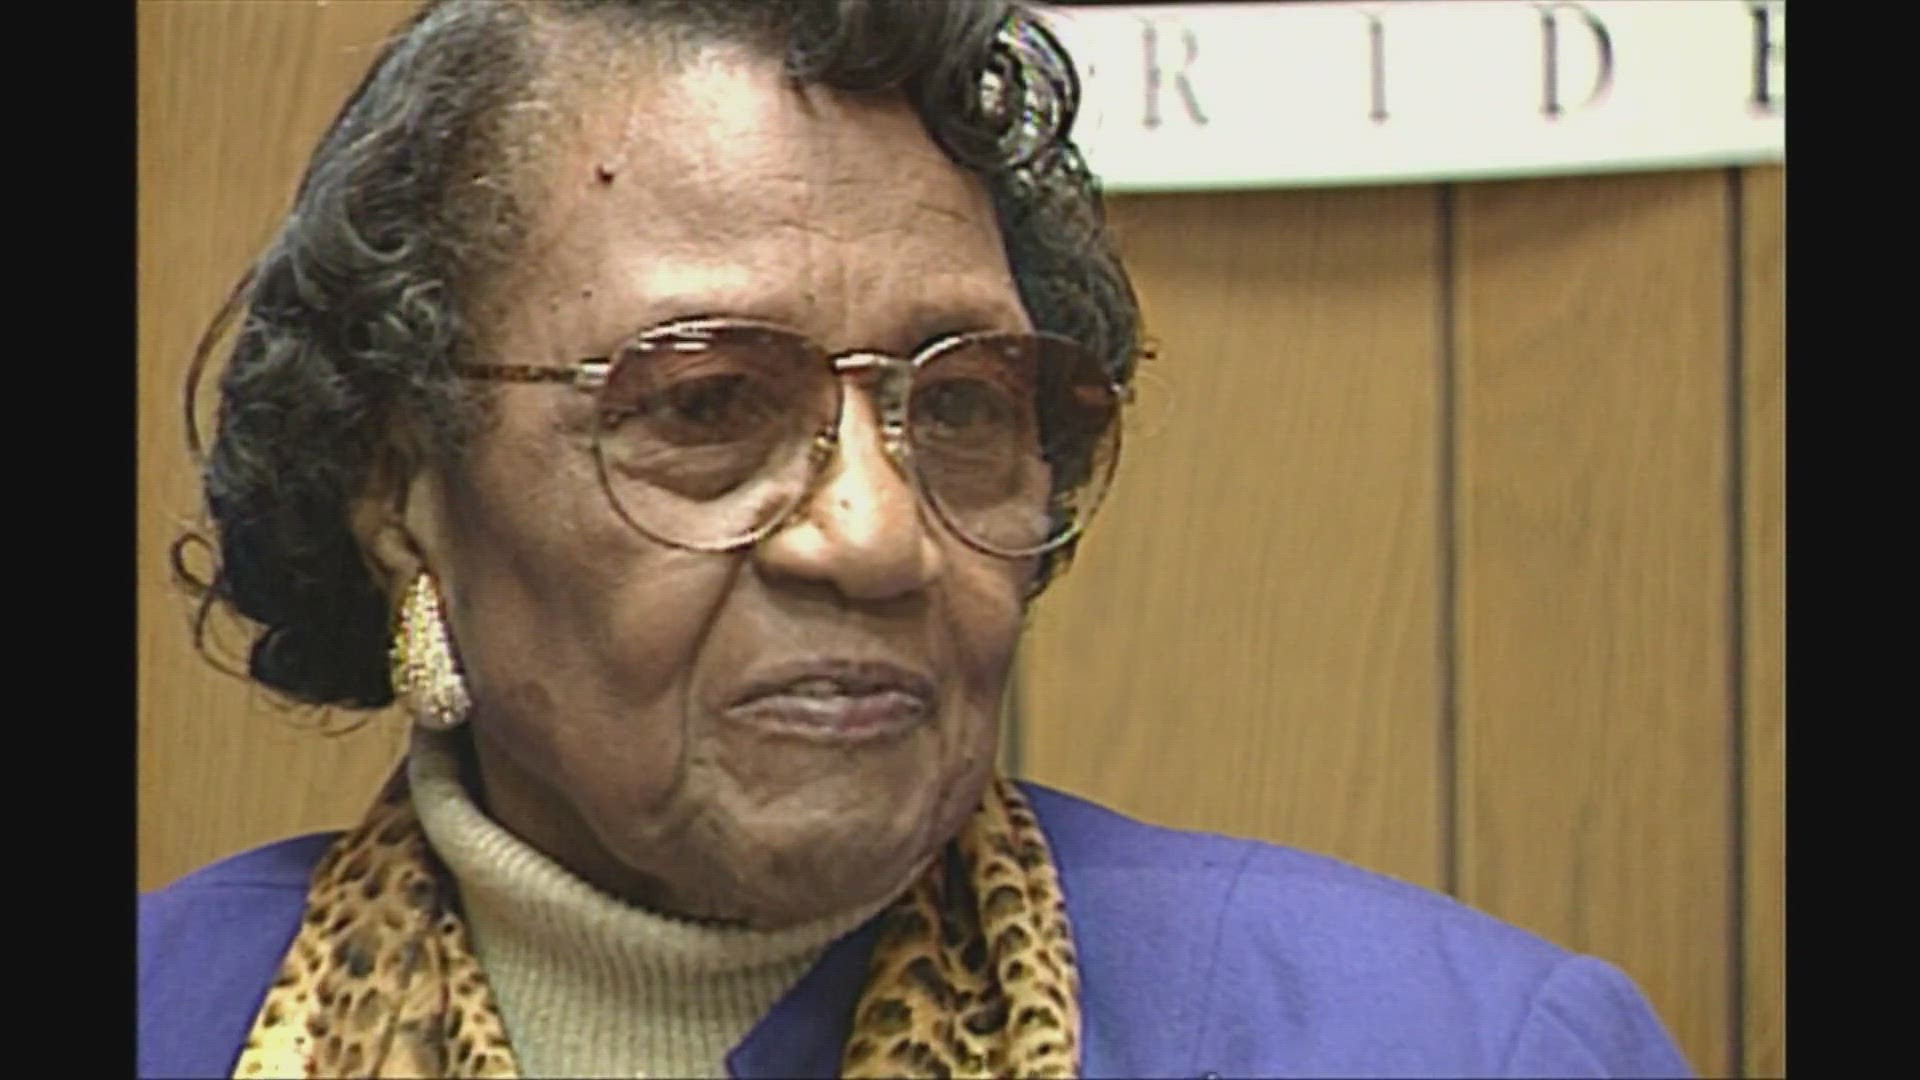 Sarah Moore Greene was the first African American school board member and NCAAP president in Knoxville.